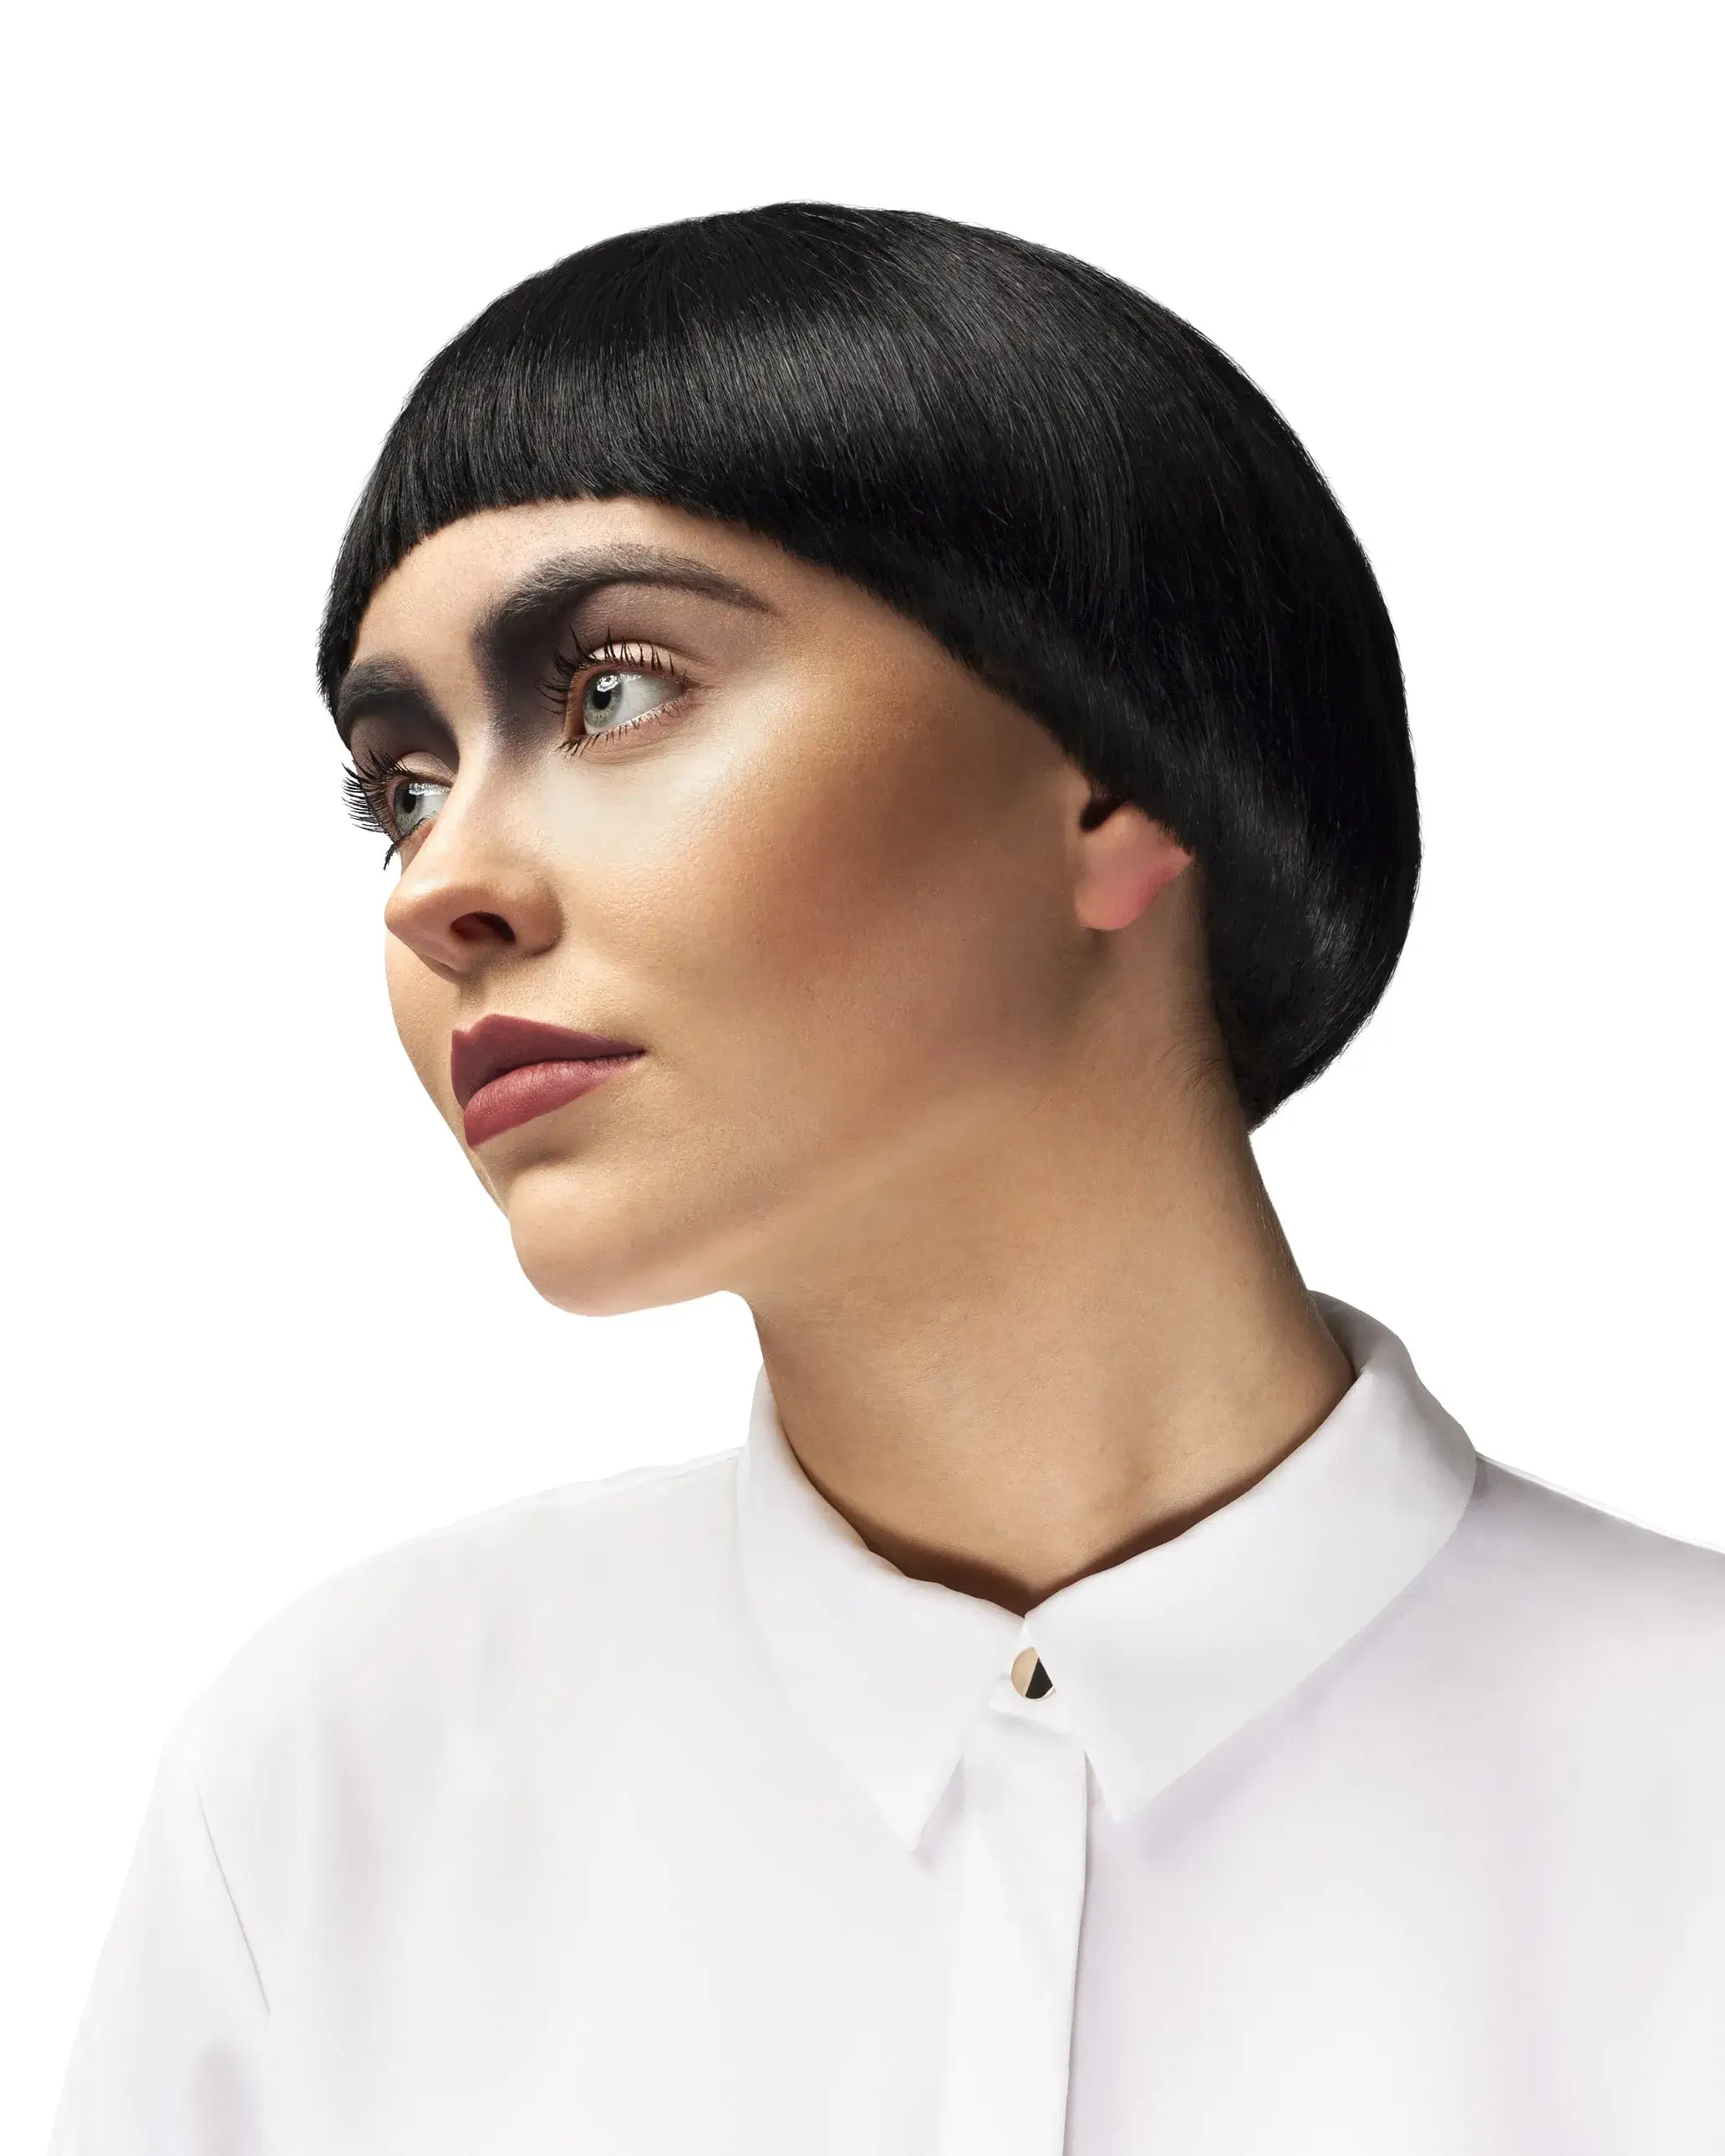 Woman with black hair in bowl cut style looking left